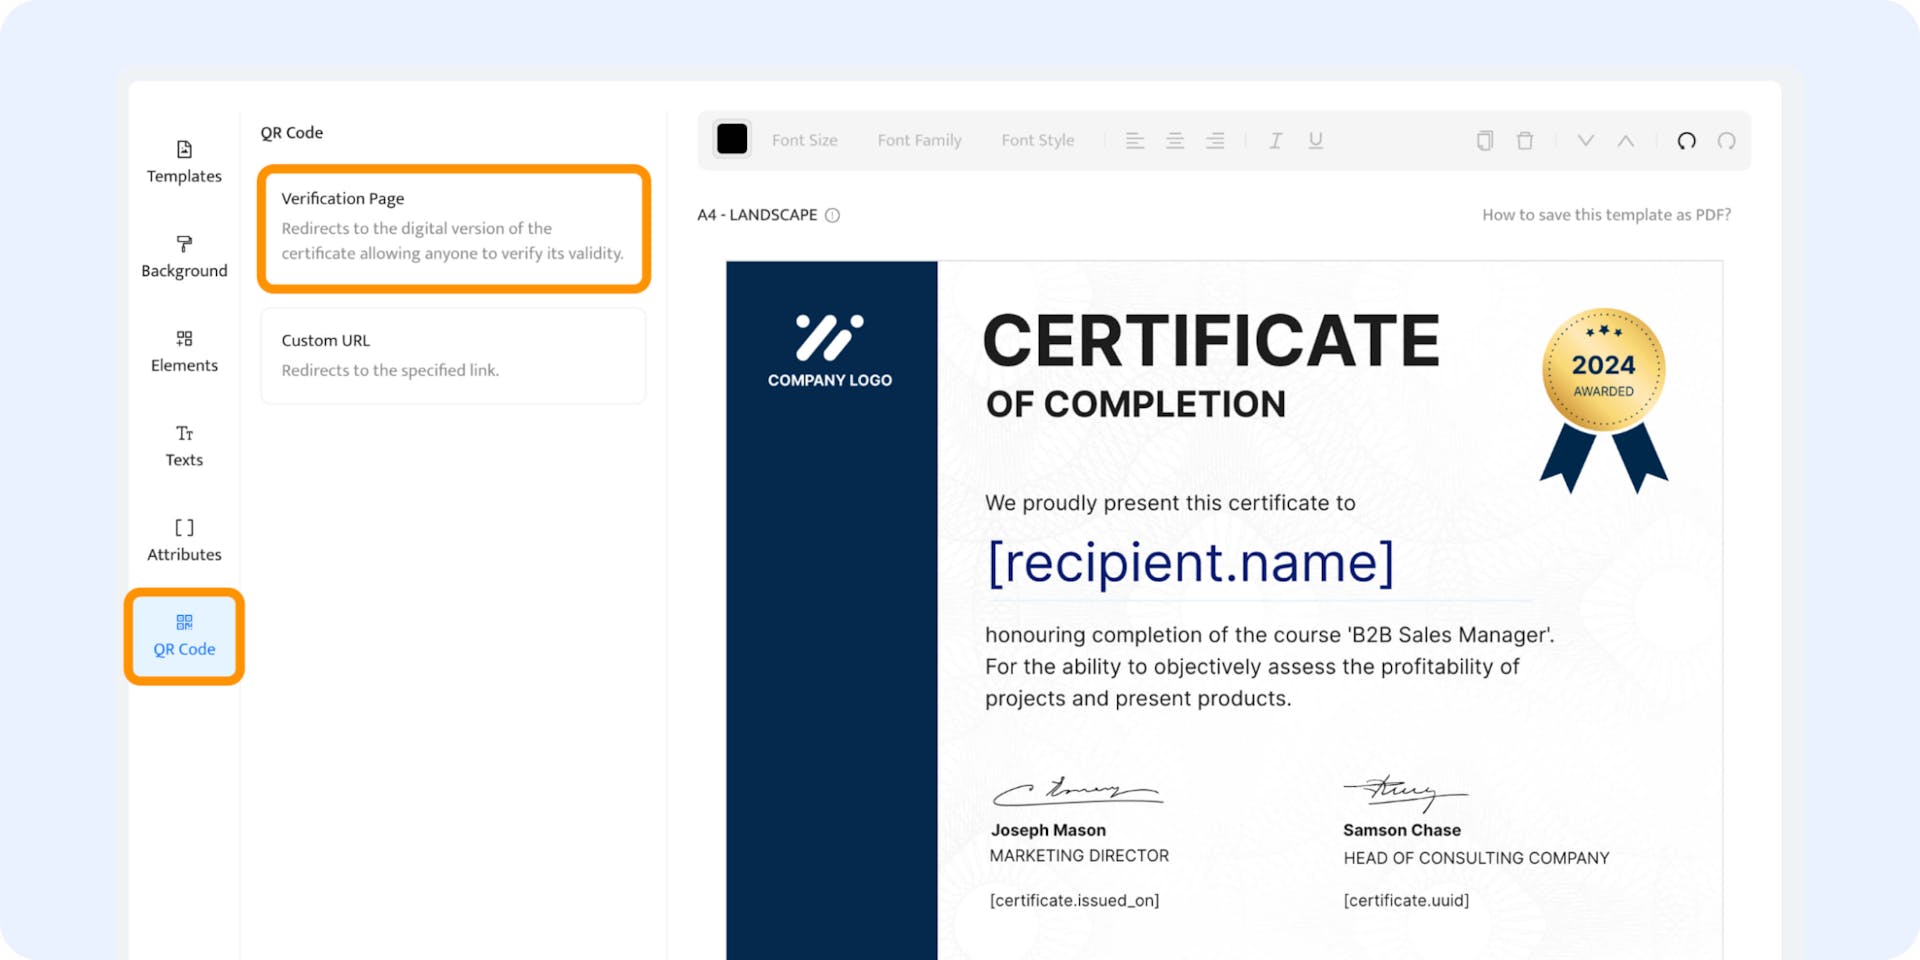 Adding QR code to the certificate as a verification page.